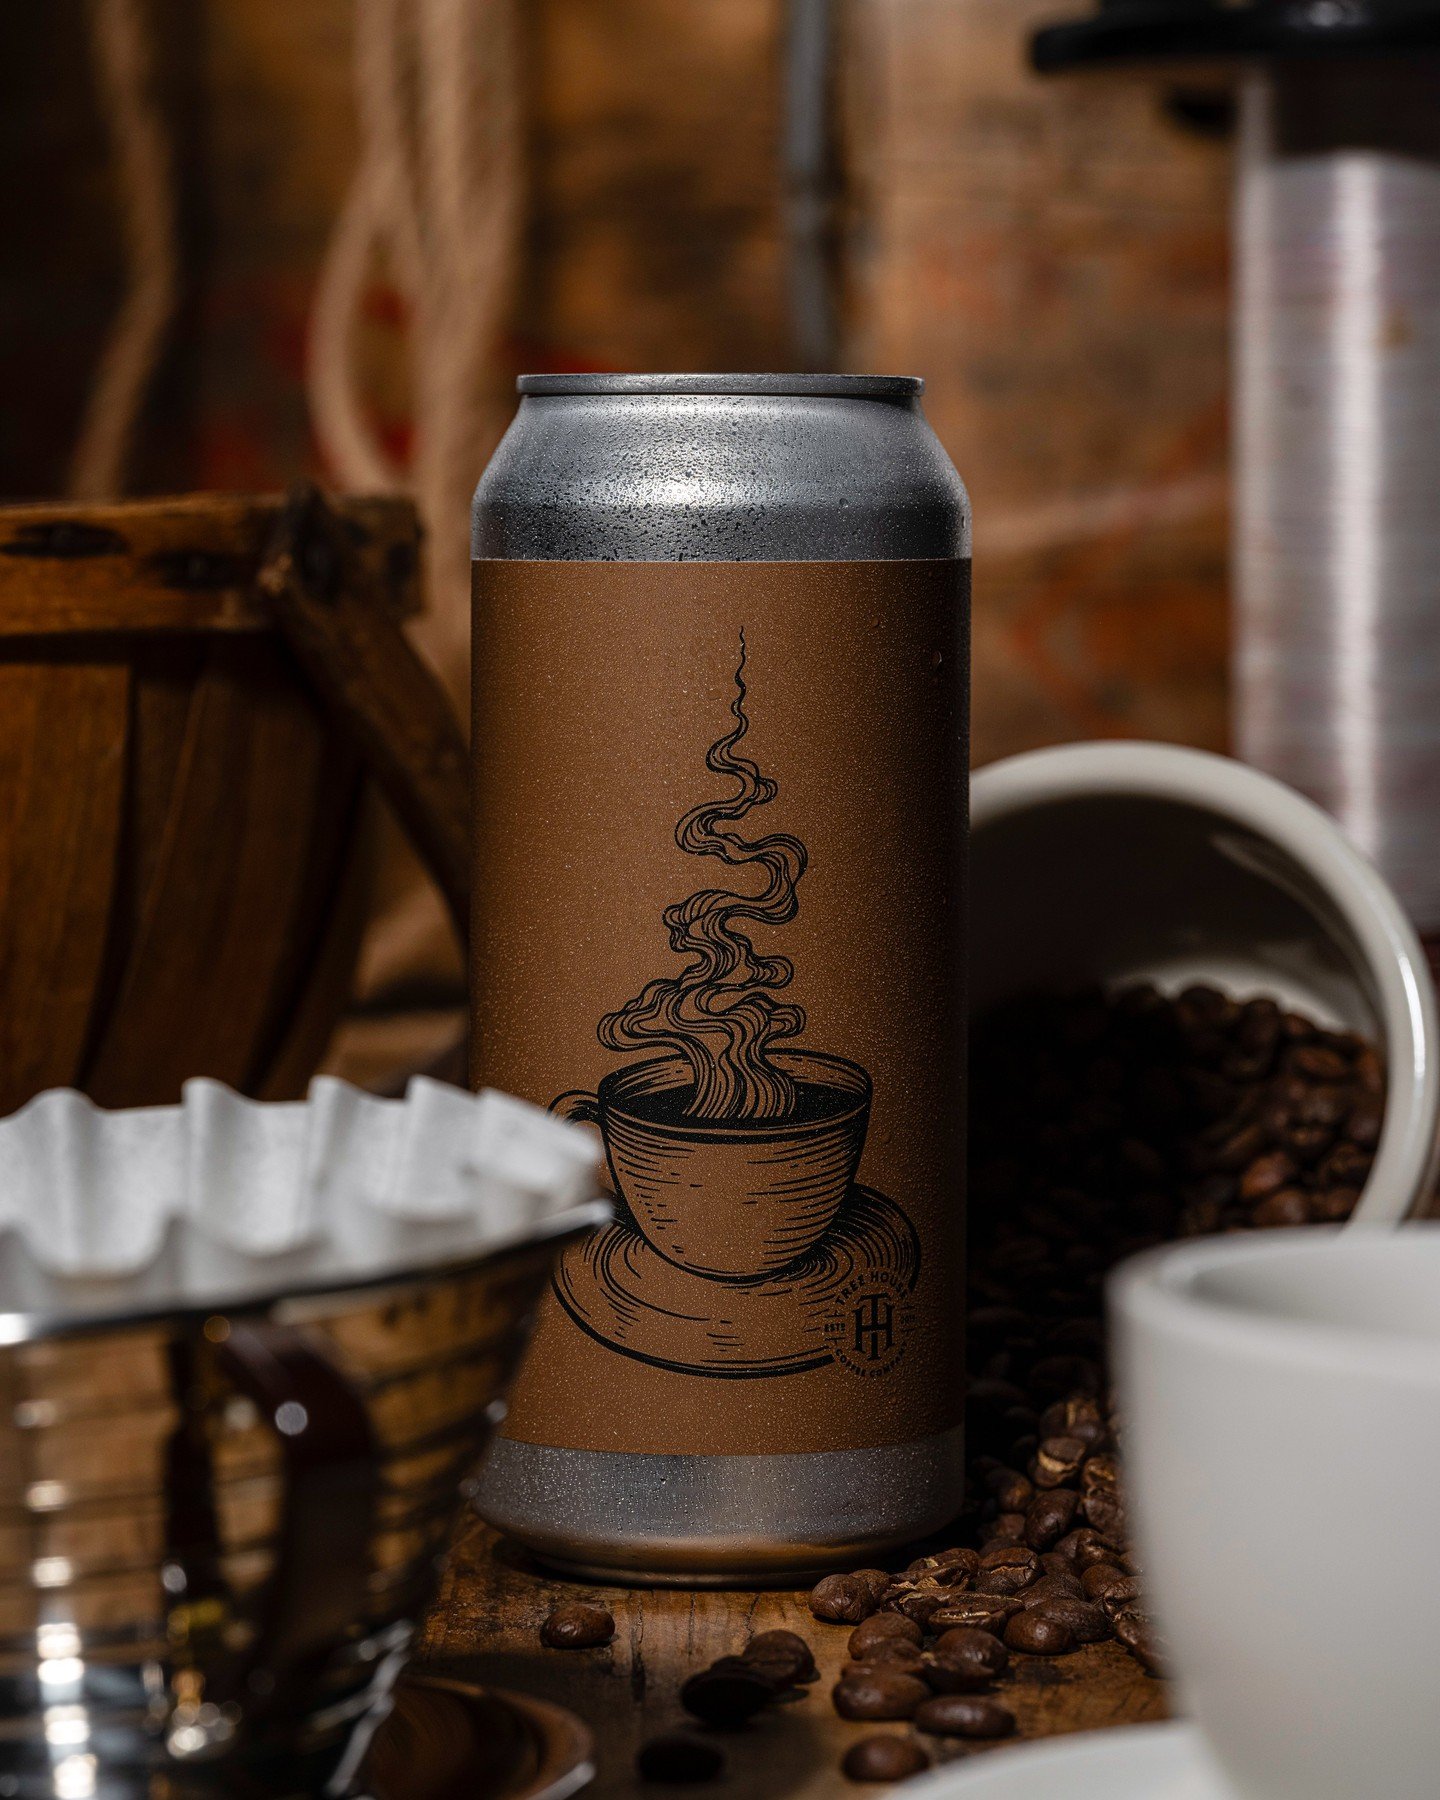 Fresh Single Shot. 

☕️😮☕️😮☕️😮

It's just so good.

#productphotography #productphotodaily #photography #craftbeer #treehousebrewing #beergram #beerstagram #beersandcameras #beerlover #beerbeerbeer #beerme #beergeek #beertography #beernerd #fujifi